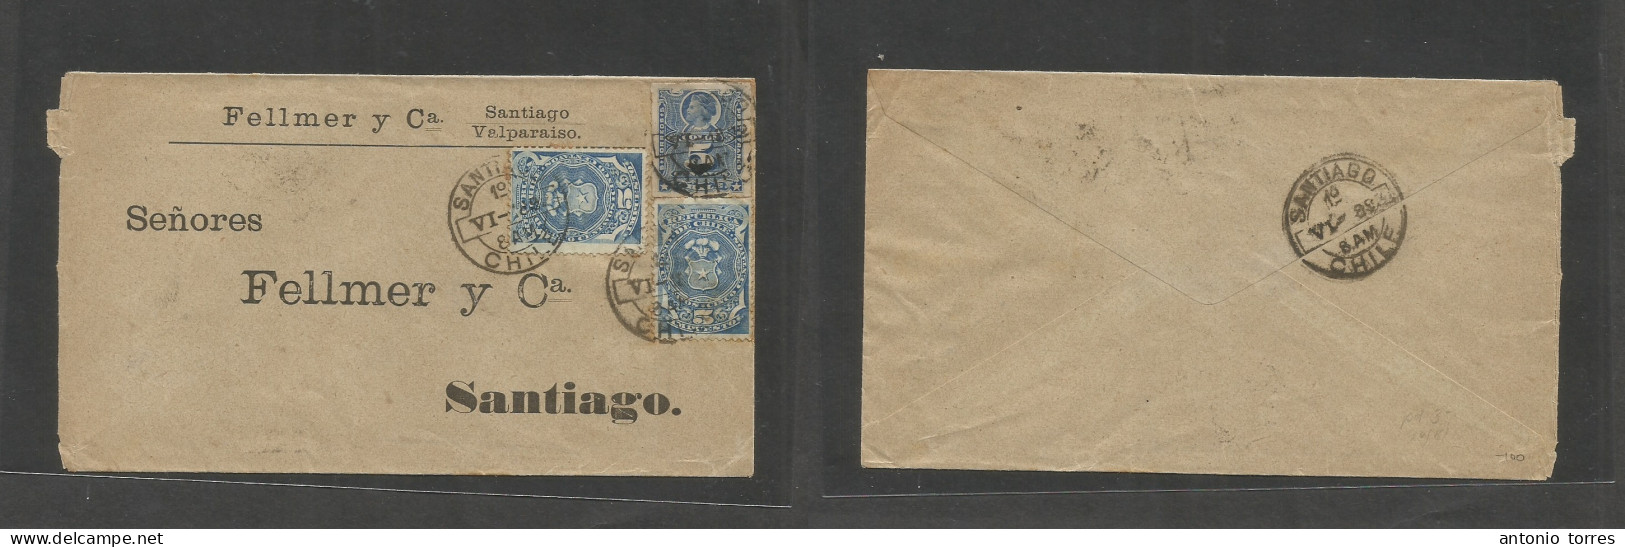 Chile. 1897 (1 June) Santiago Local Usage. Provisional Period Fiscal Used As Postage. 5c Blue (x2 + 5c Mns) At 15c Rate. - Chili